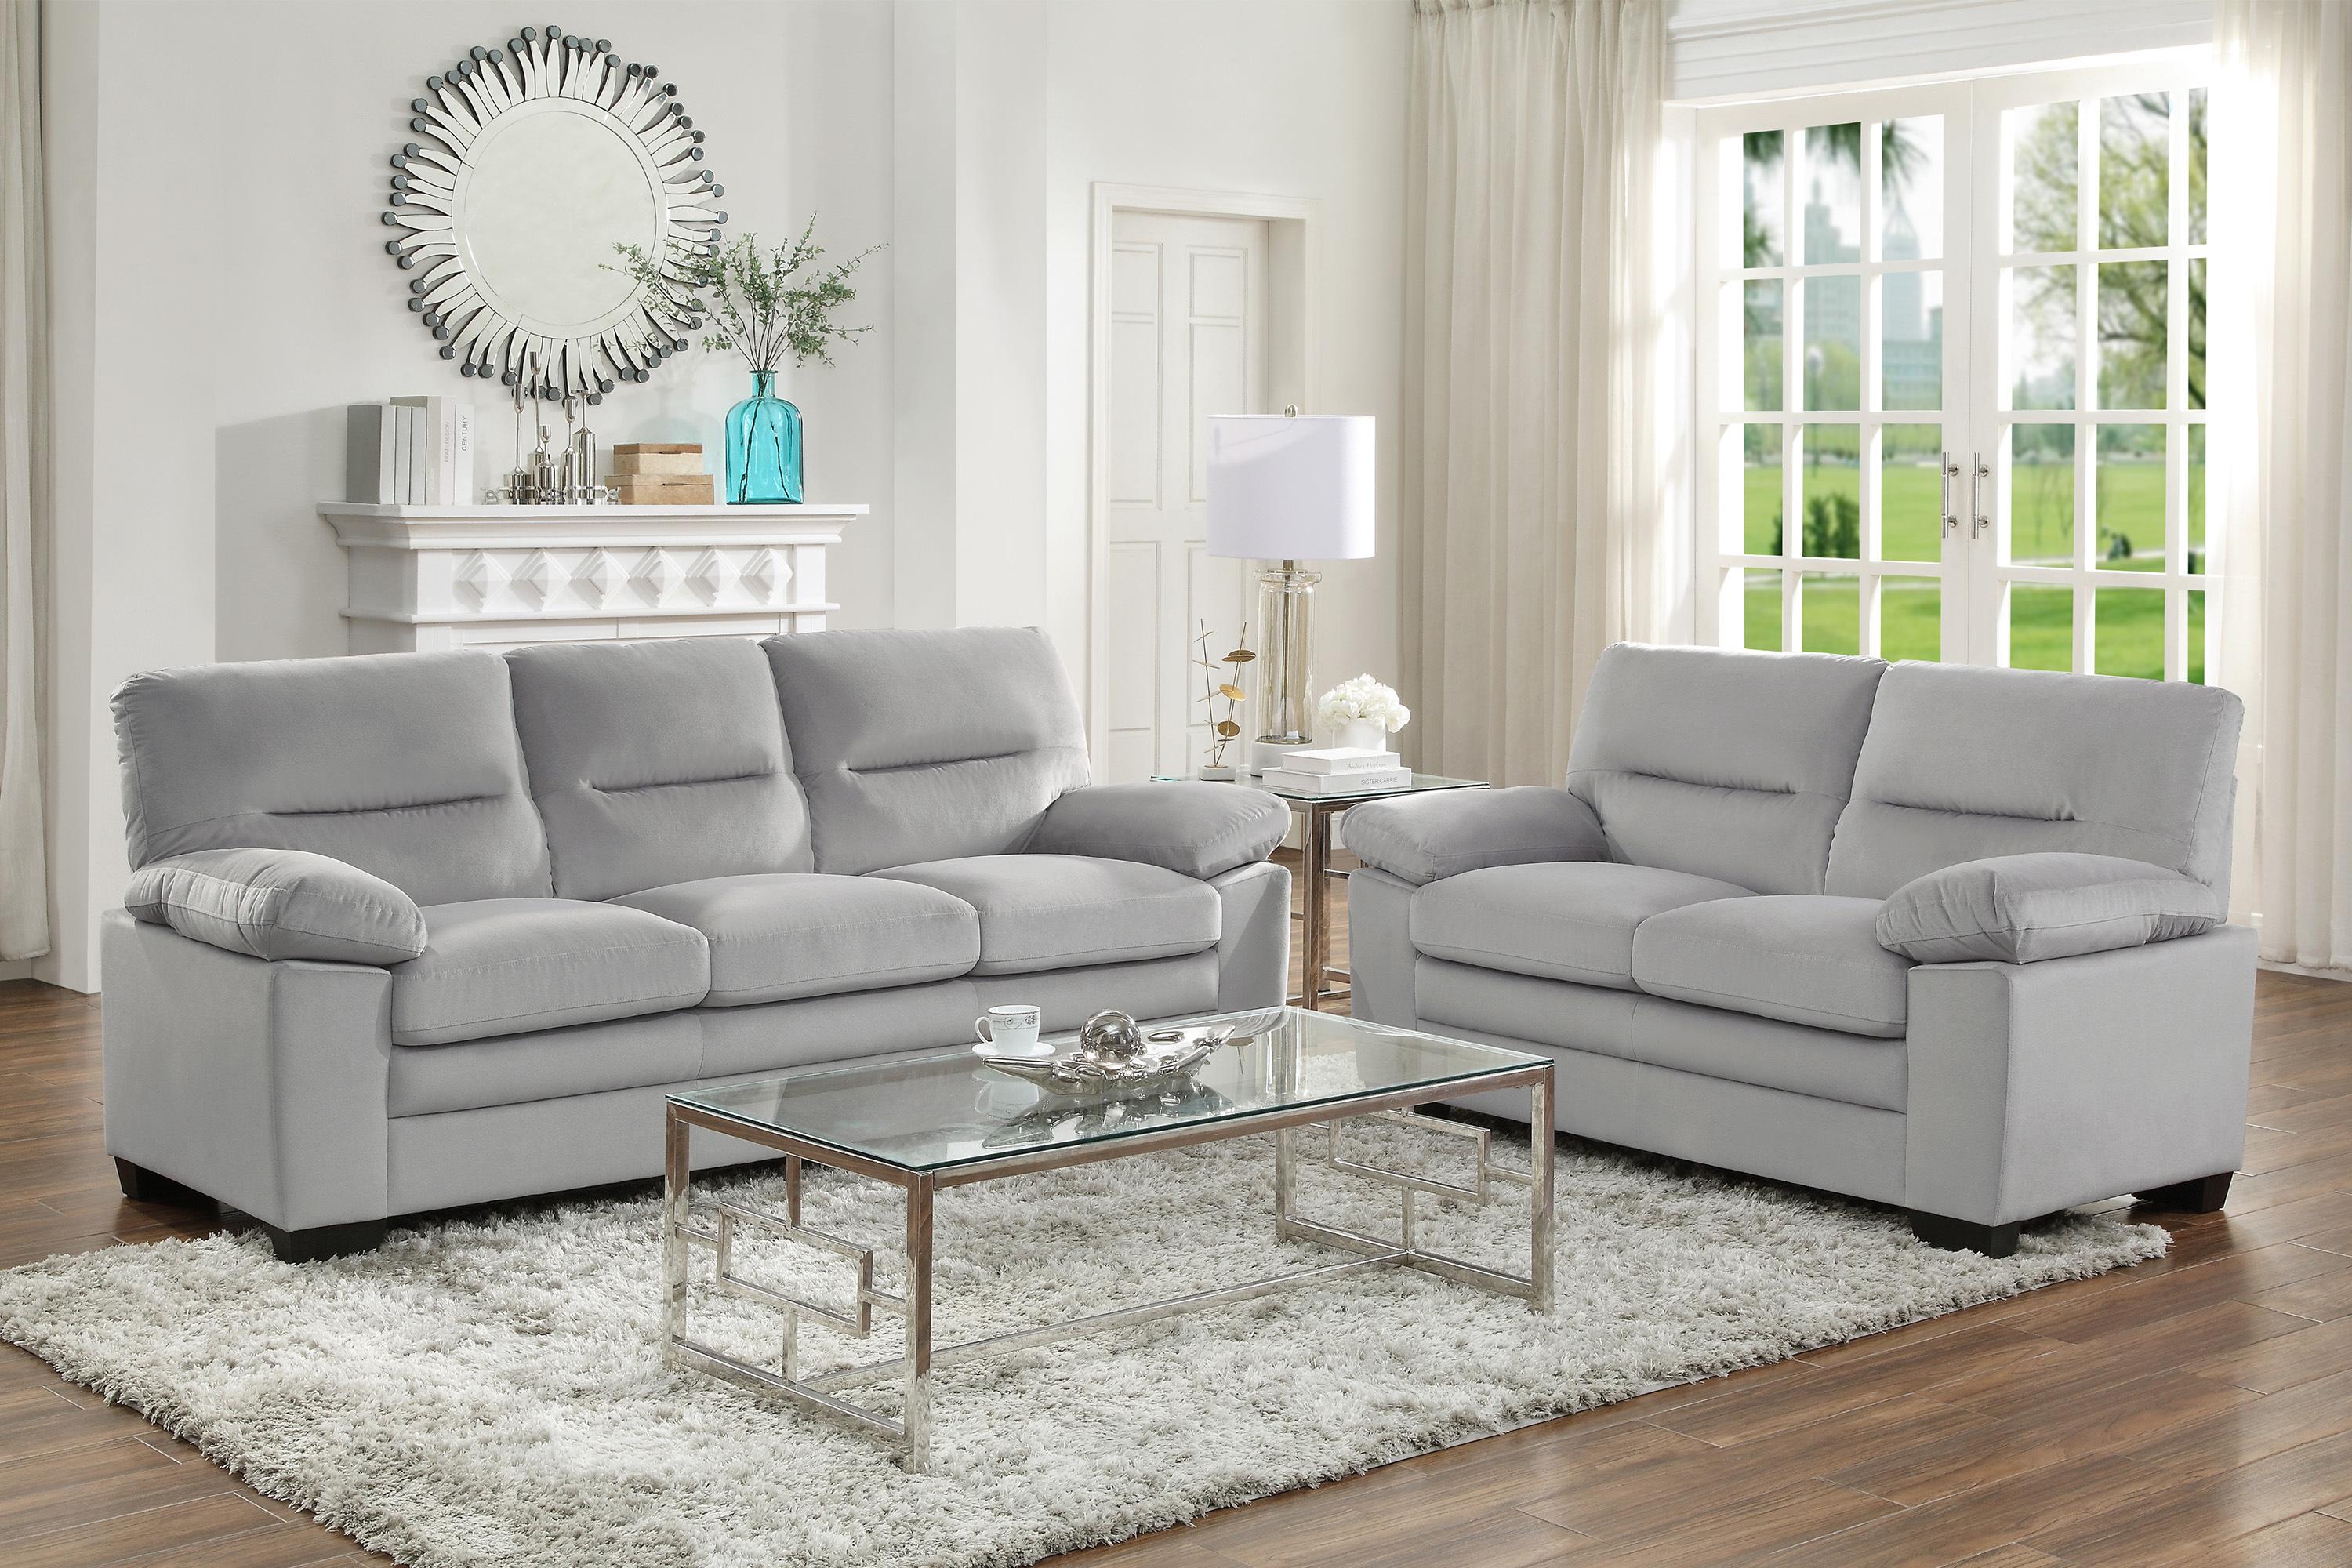 Modern Living Room Set 9328GY-2PC Keighly 9328GY-2PC in Gray 